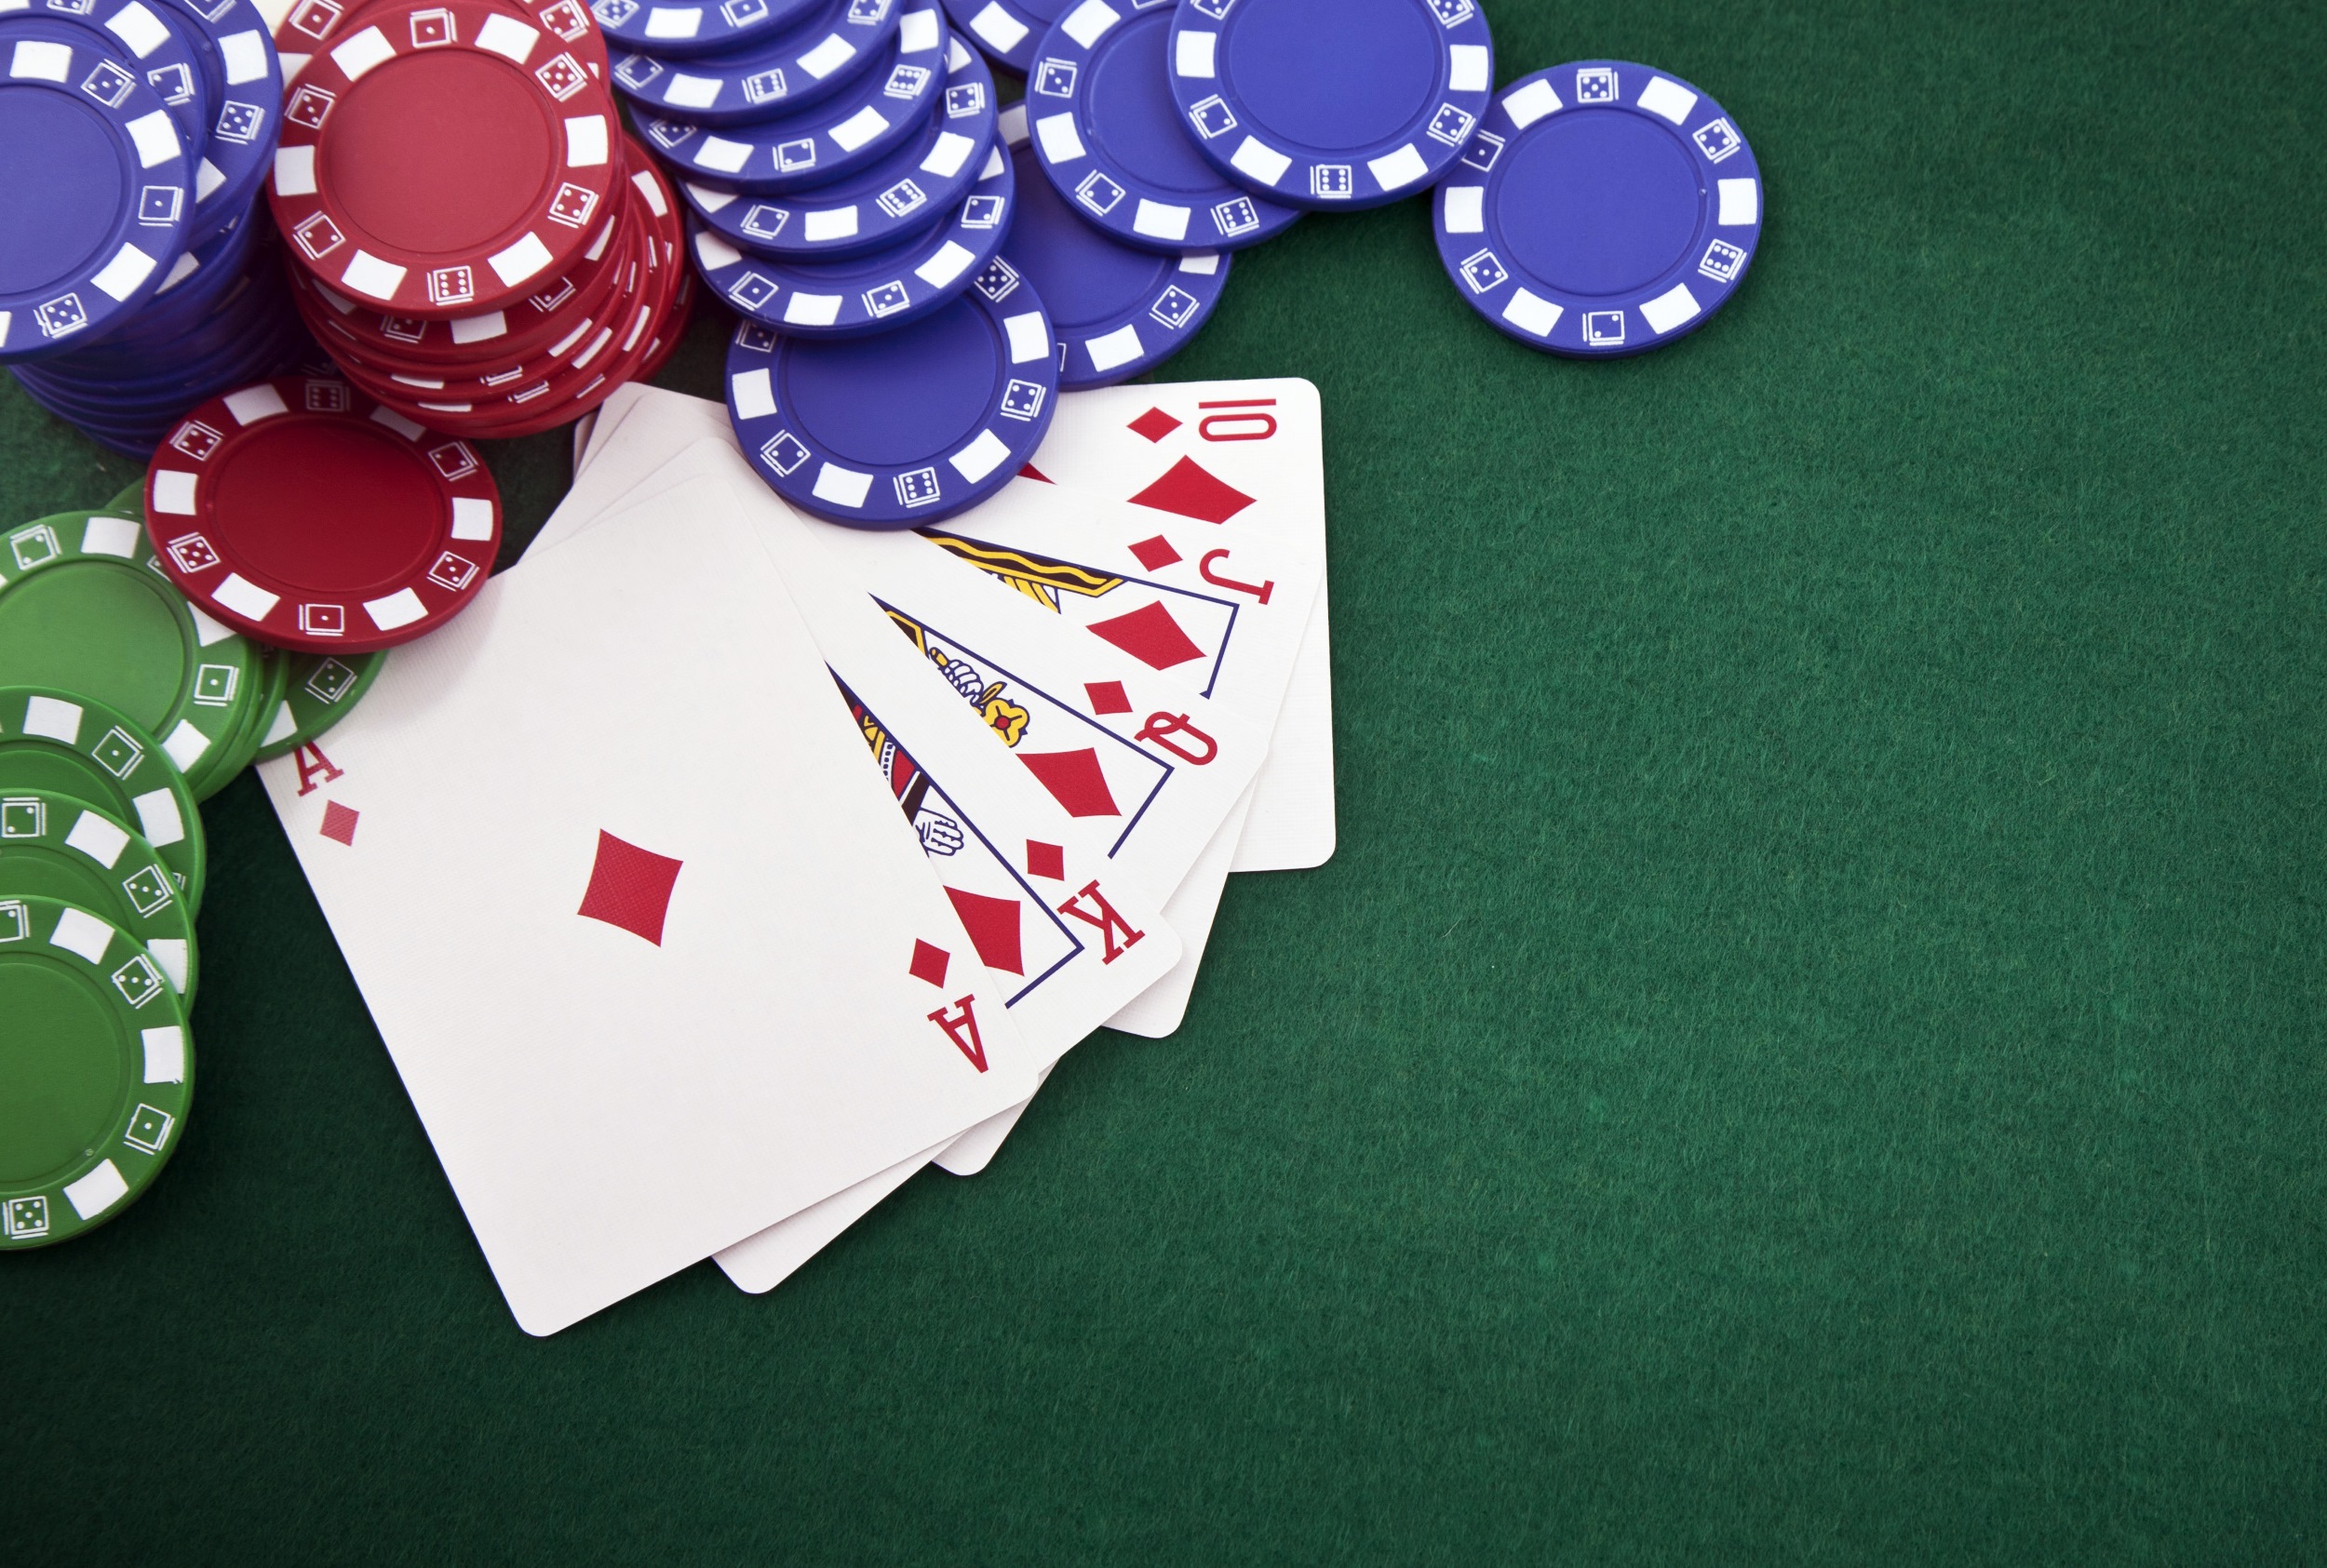 Poker: Types of players and styles of play